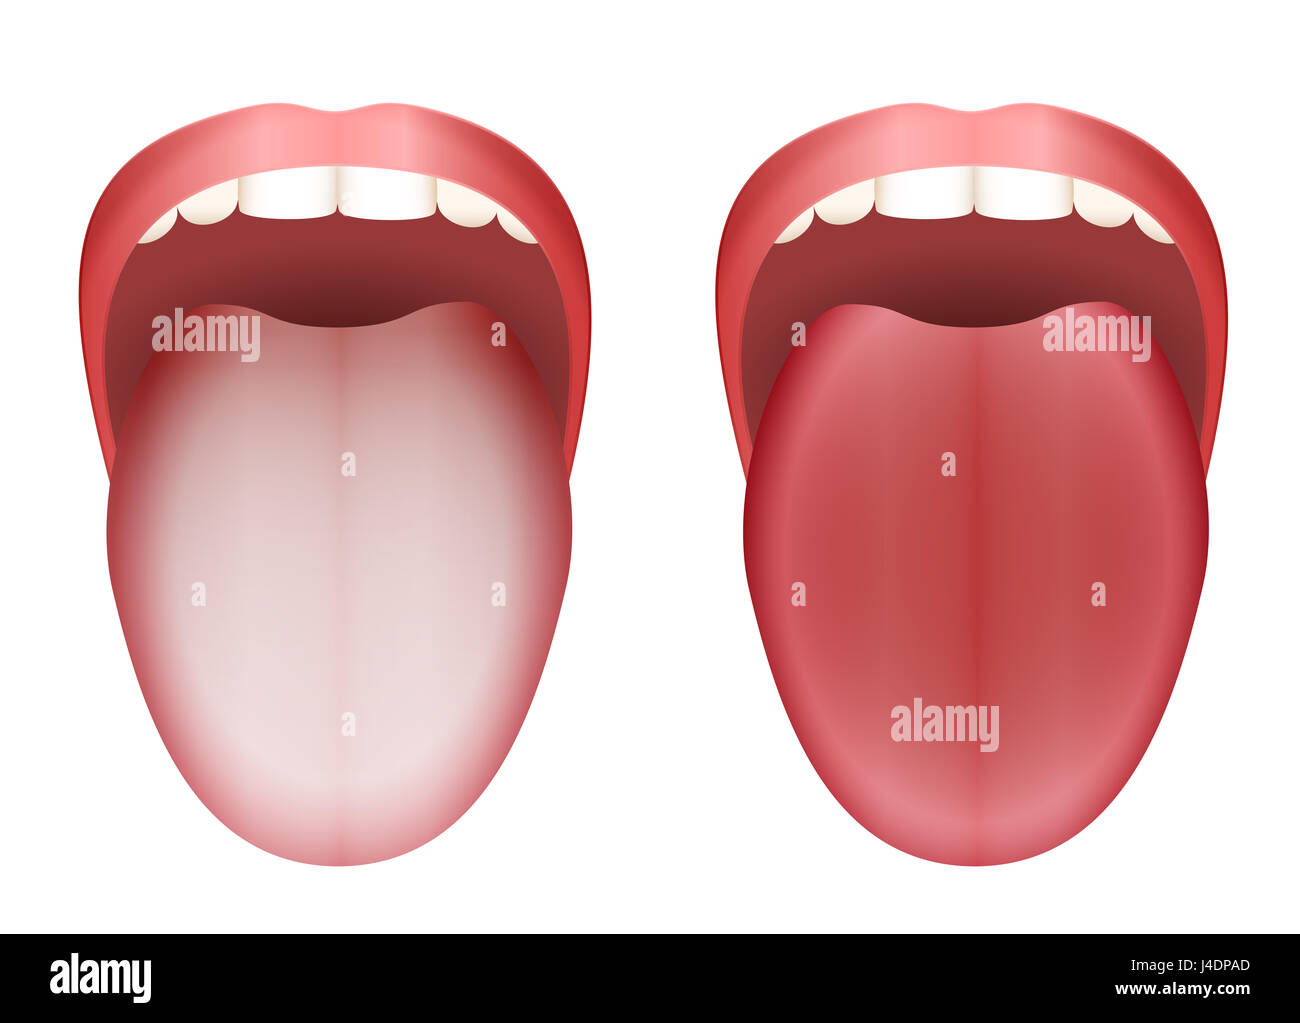 Coated white tongue and clean healthy tongue by comparison - illustration on white background. Stock Photo